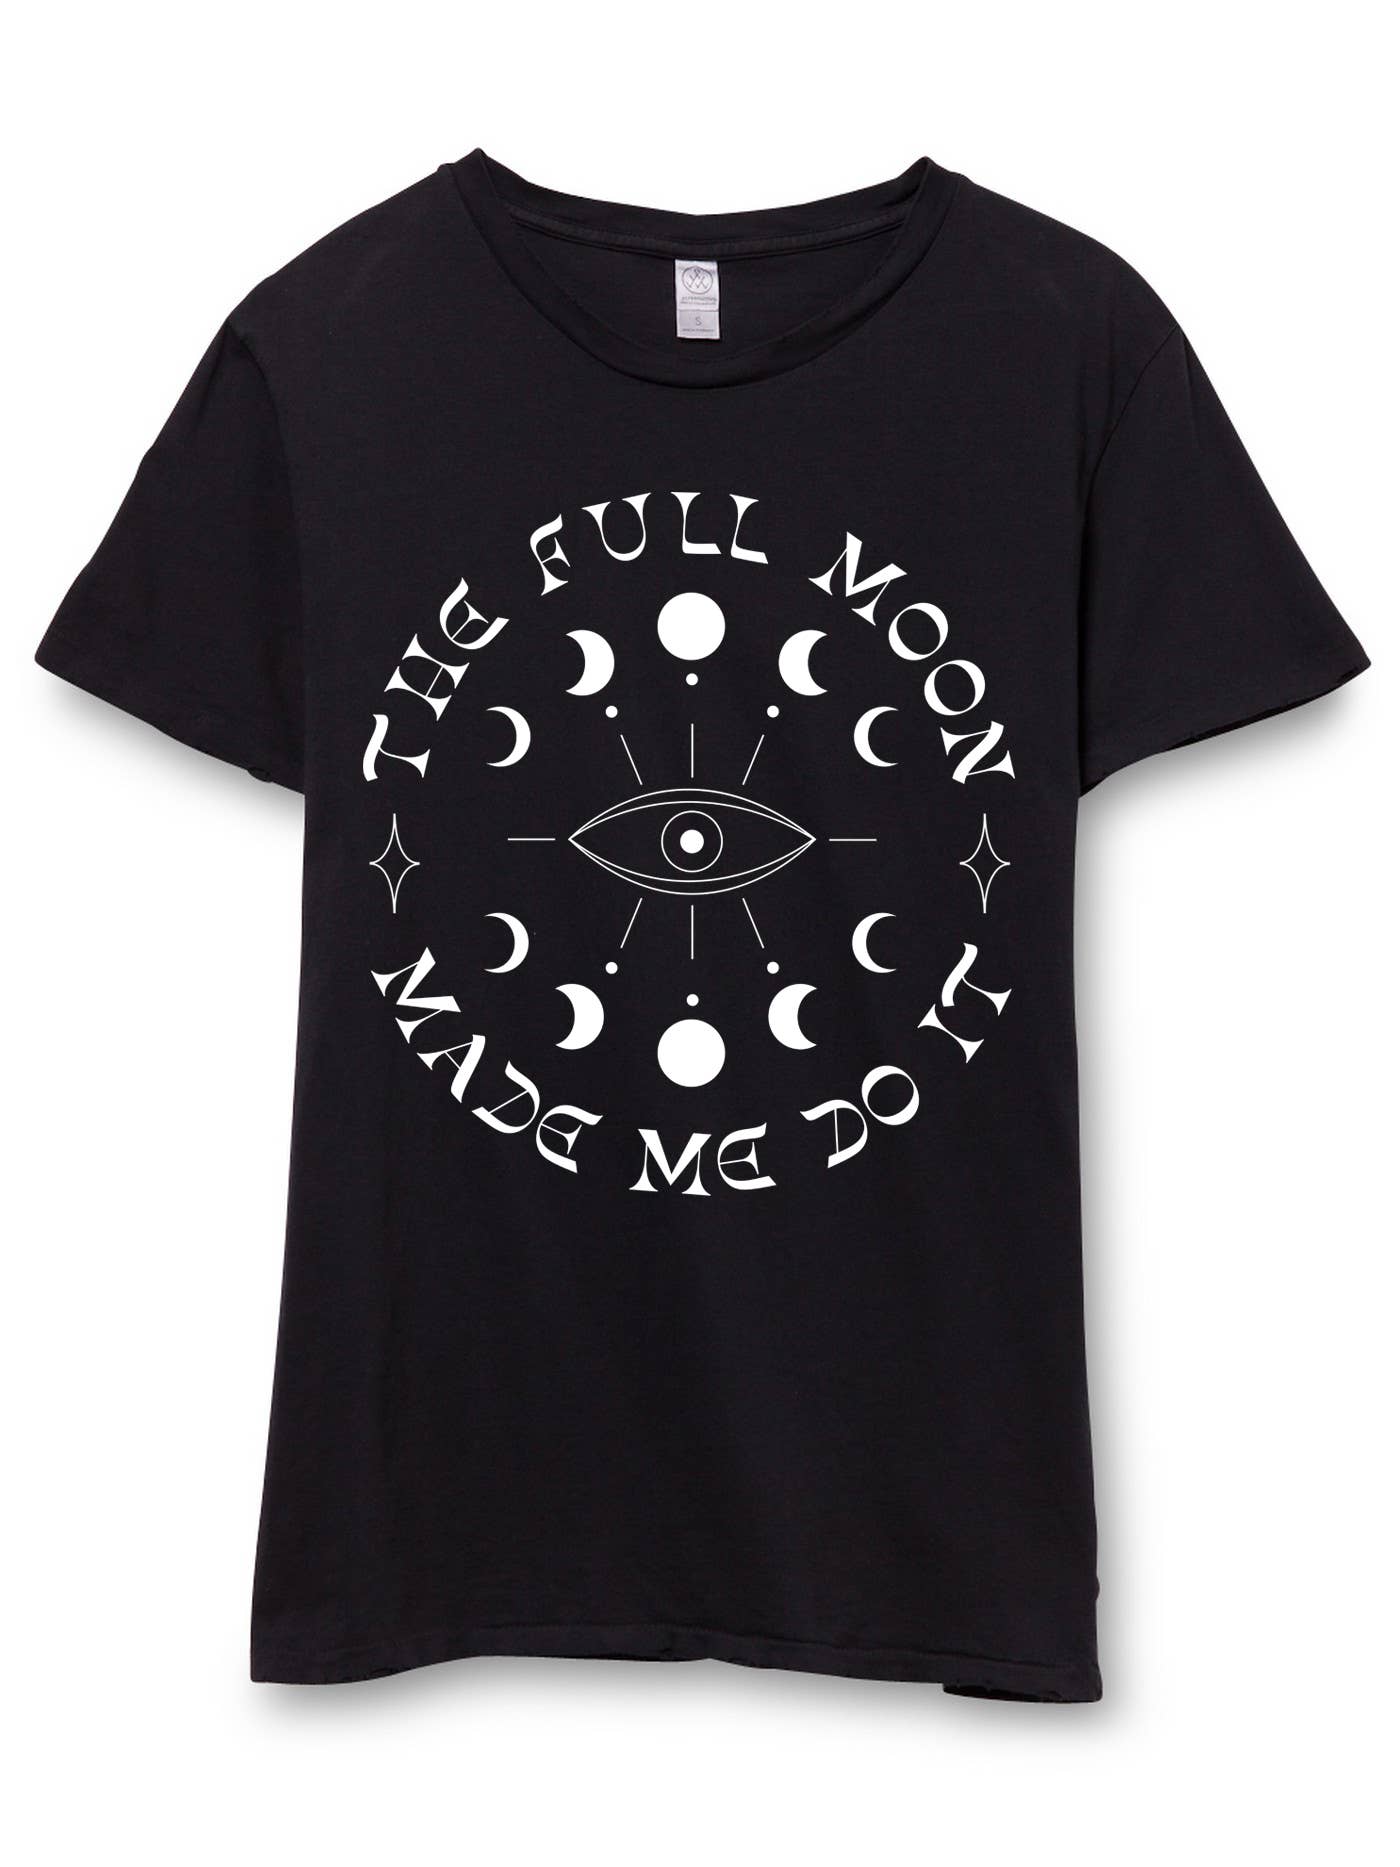 Schnell Studio - Full Mood Made Me Do It Distressed Tee